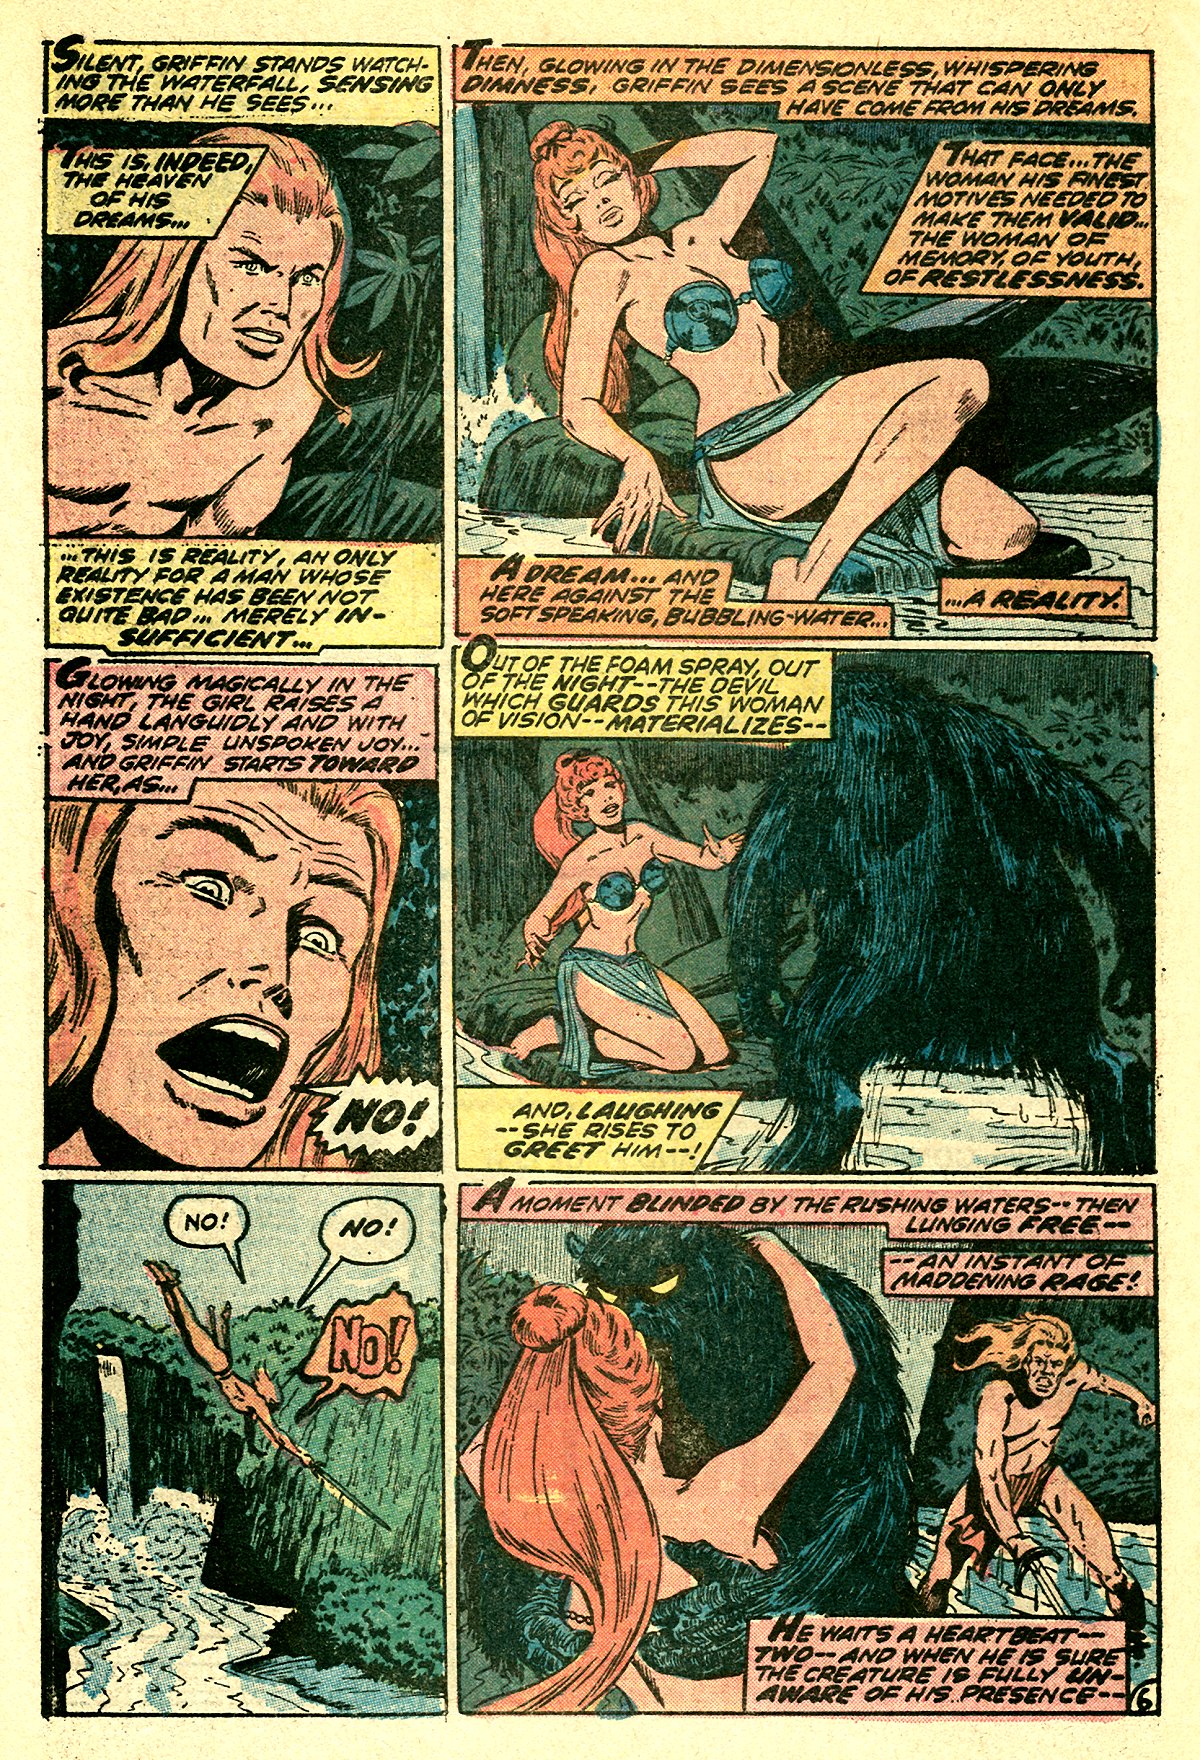 Chamber of Chills (1972) 1 Page 27